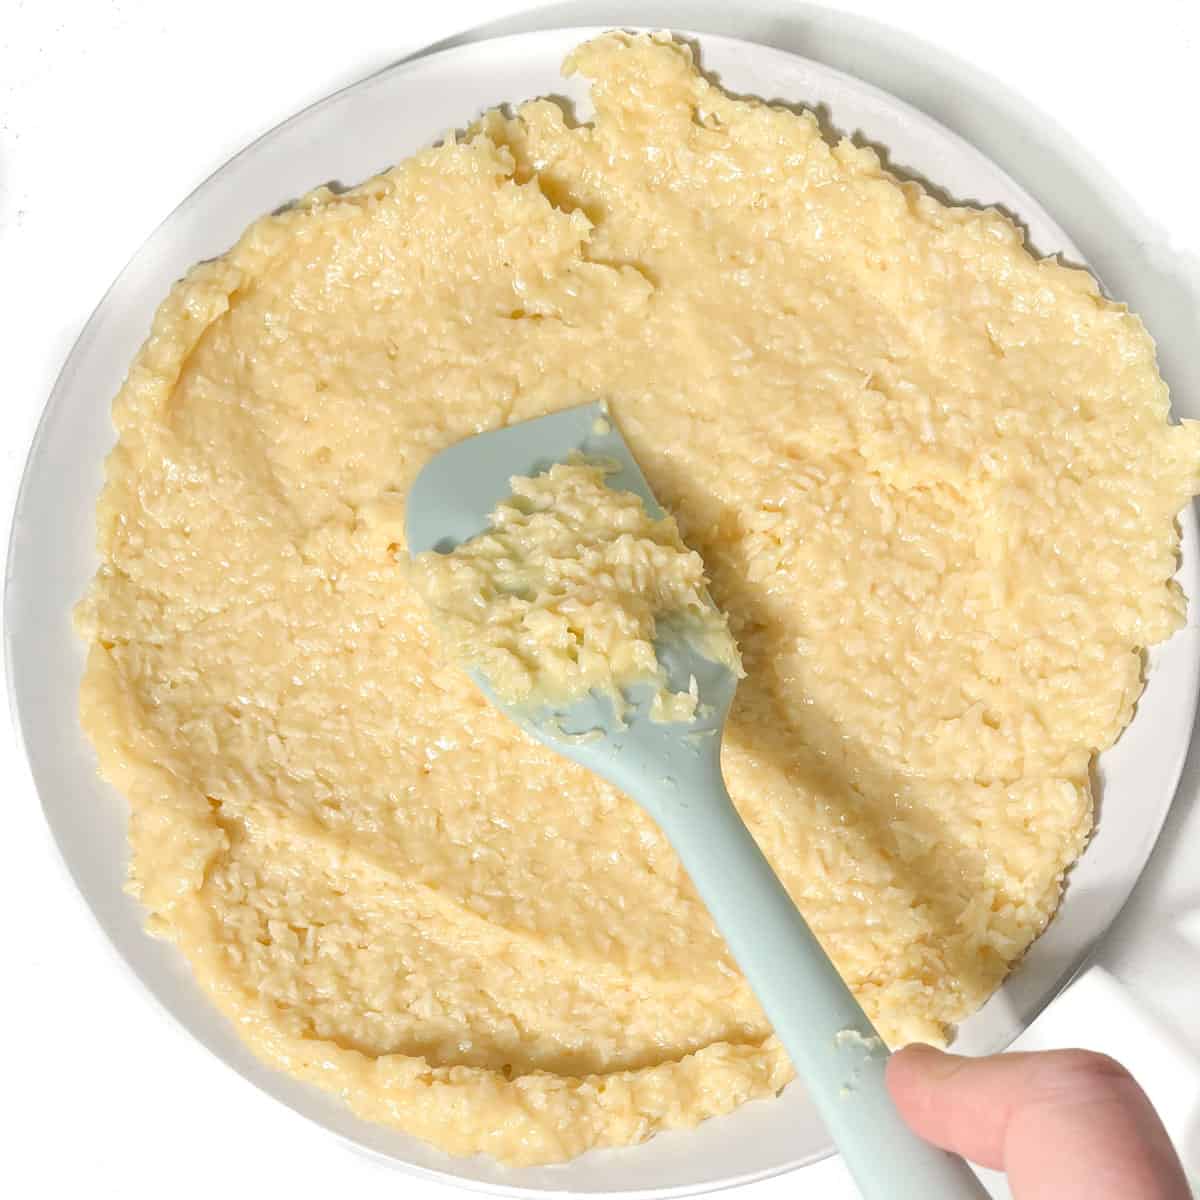 The Beijinhos mixture being spread out thinly on a plate with a rubber spatula.